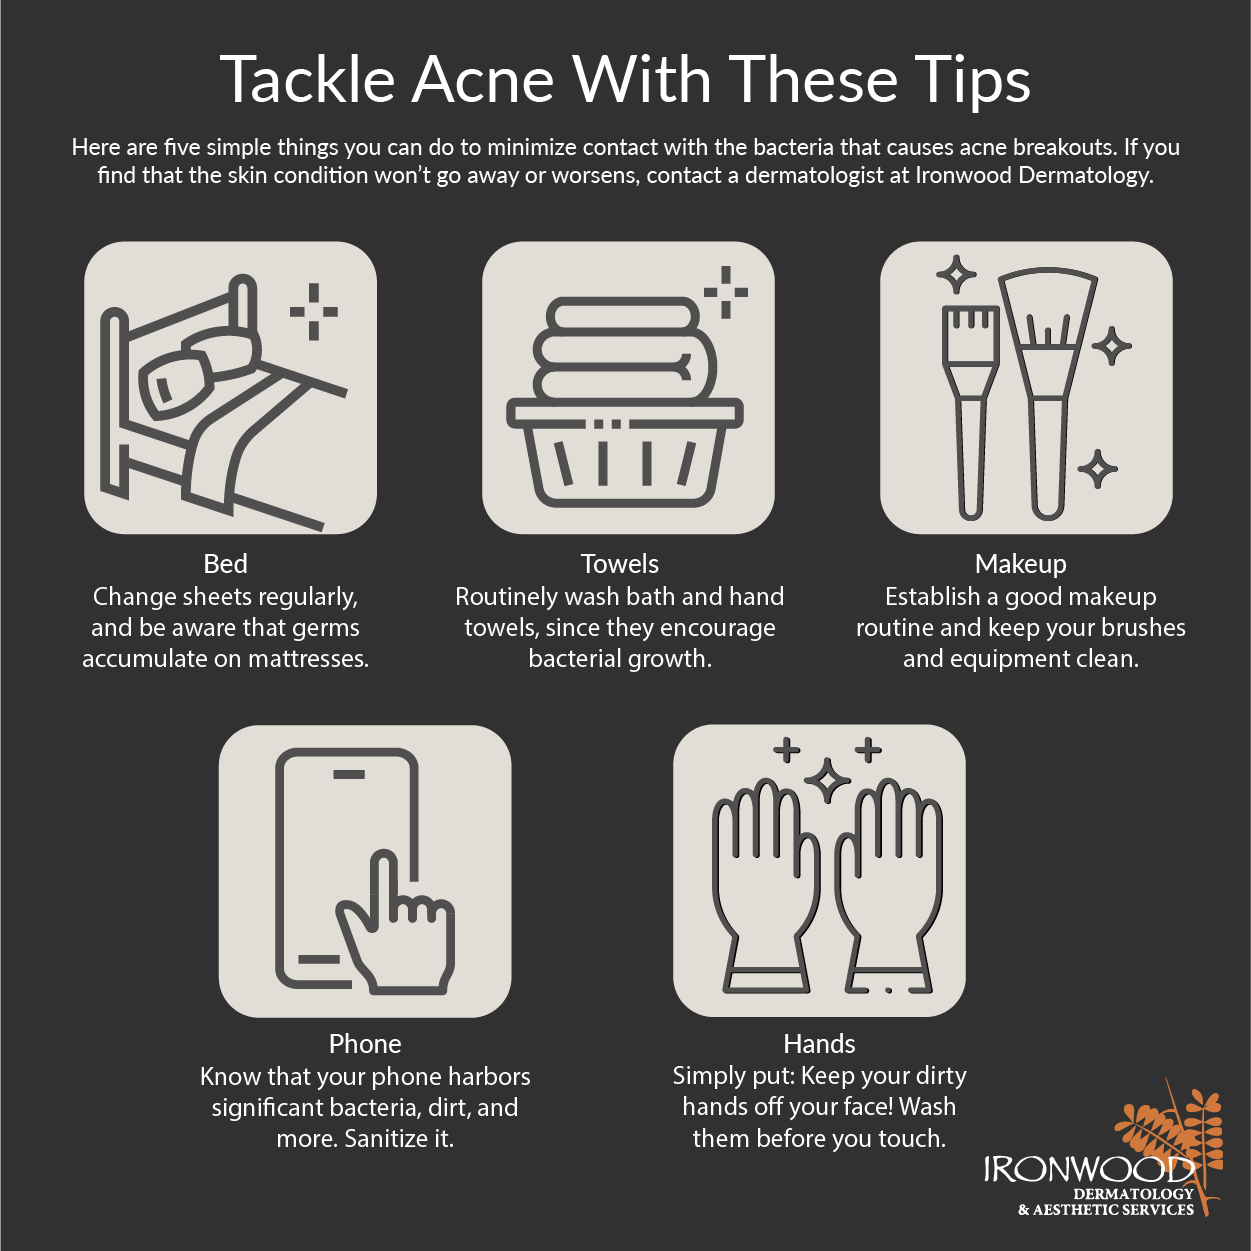 Follow these tips to reduce acne in Tucson and Oro Valley.